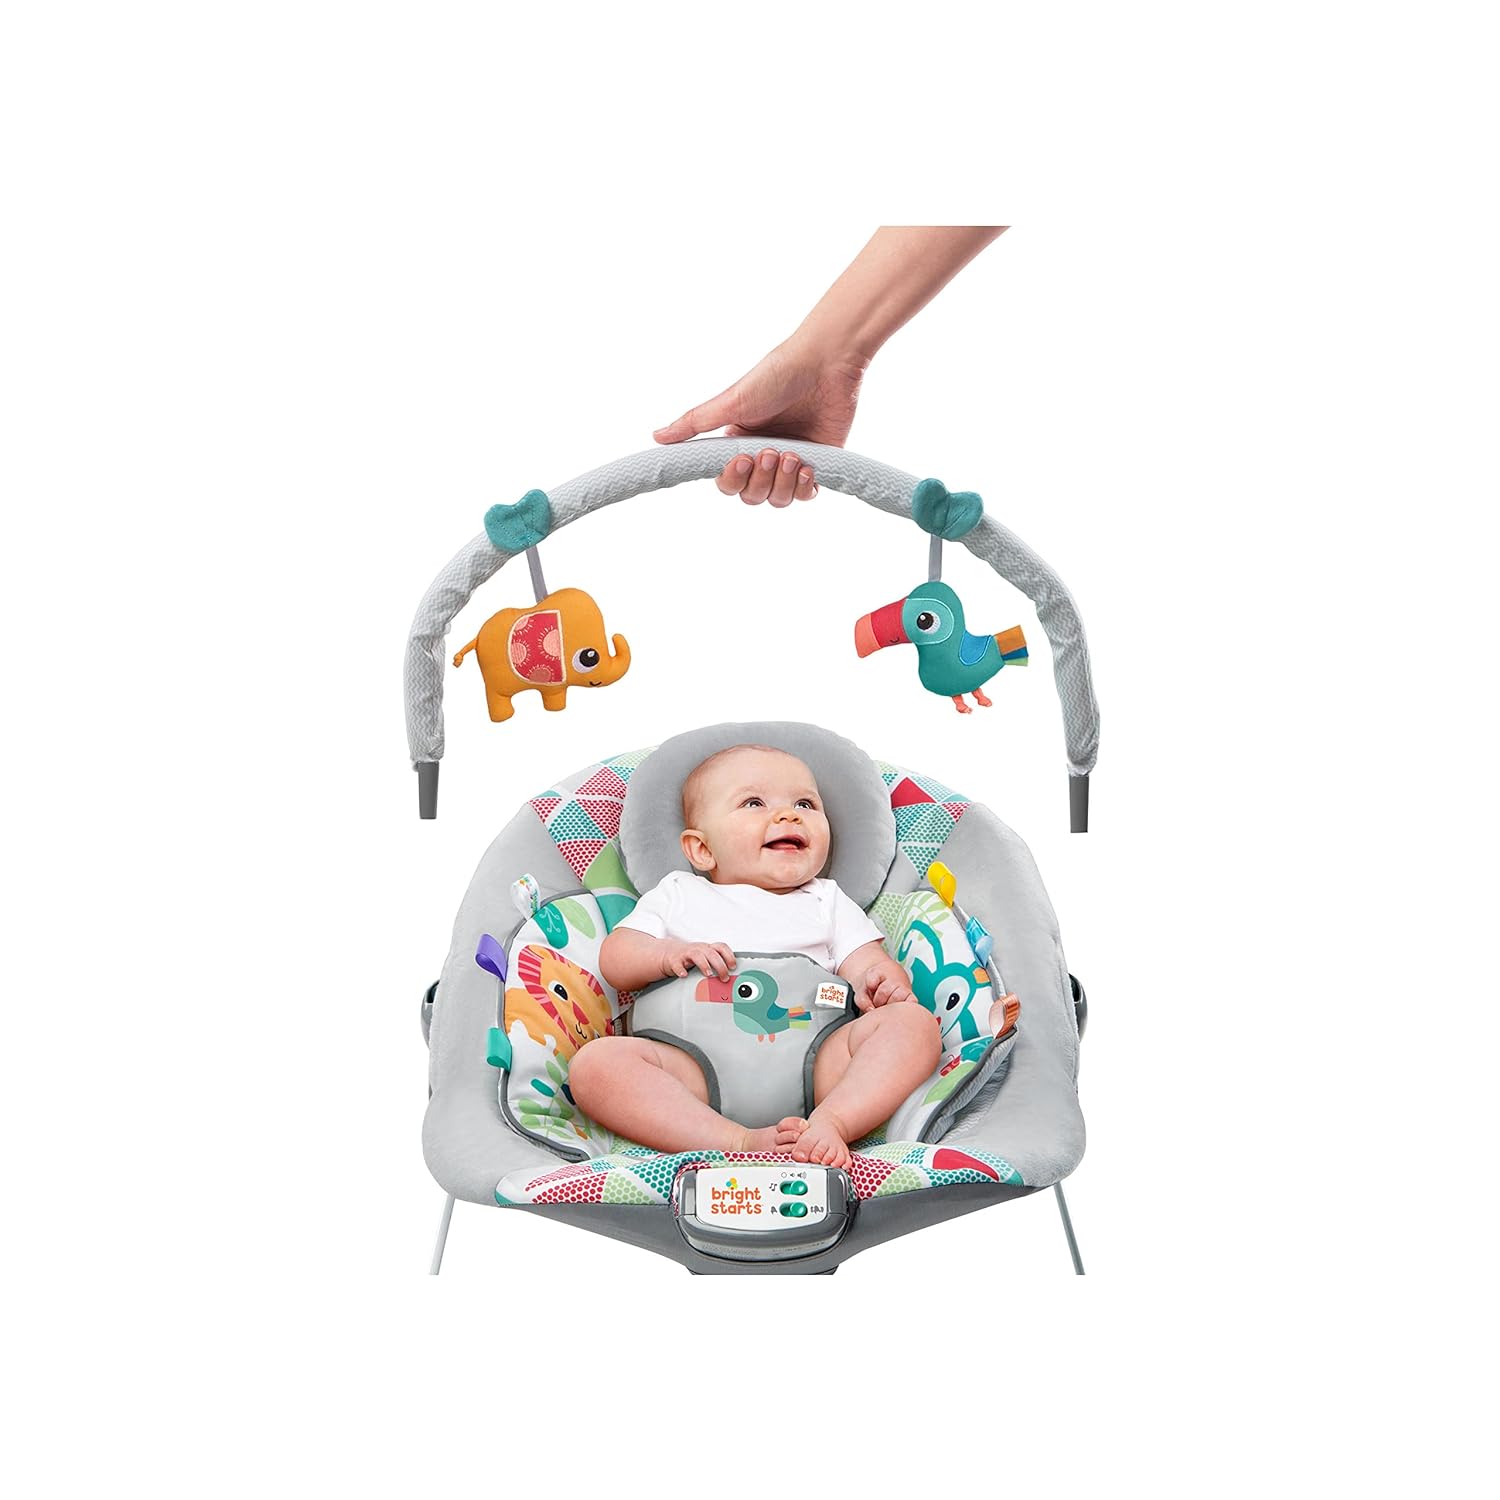 Bright Starts Baby Bouncer Soothing Vibrations Infant Seat, Toucan Tango